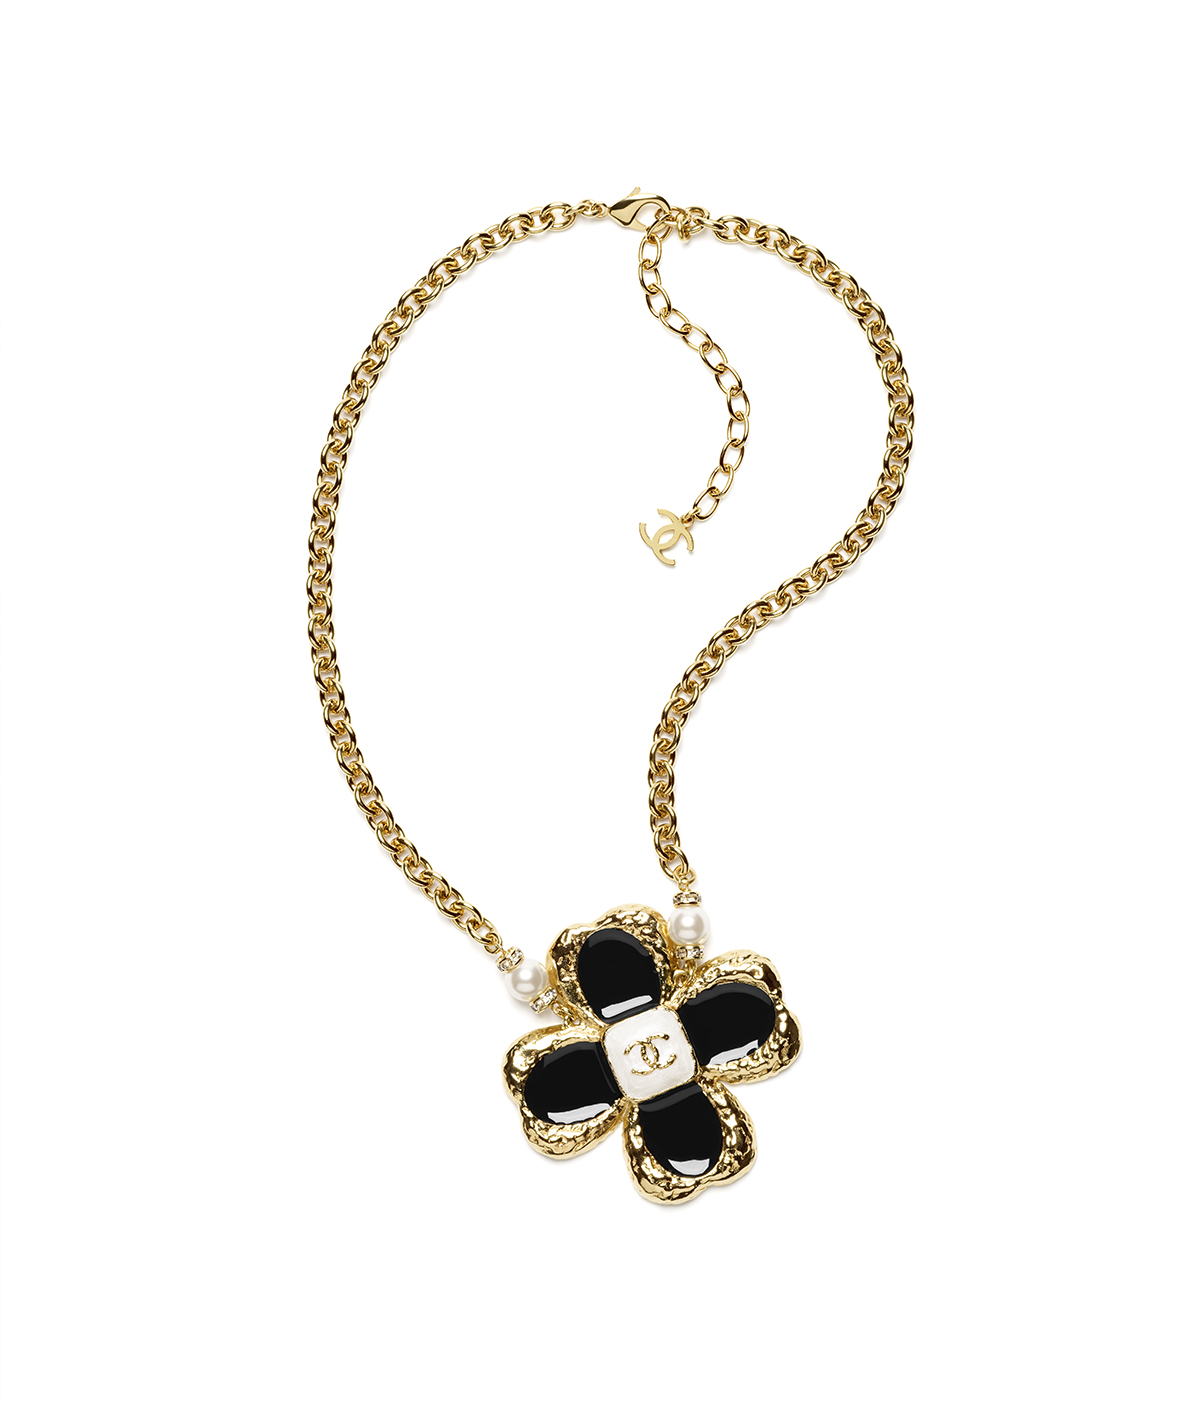 A gold necklace with a black flower and diamonds in the centre